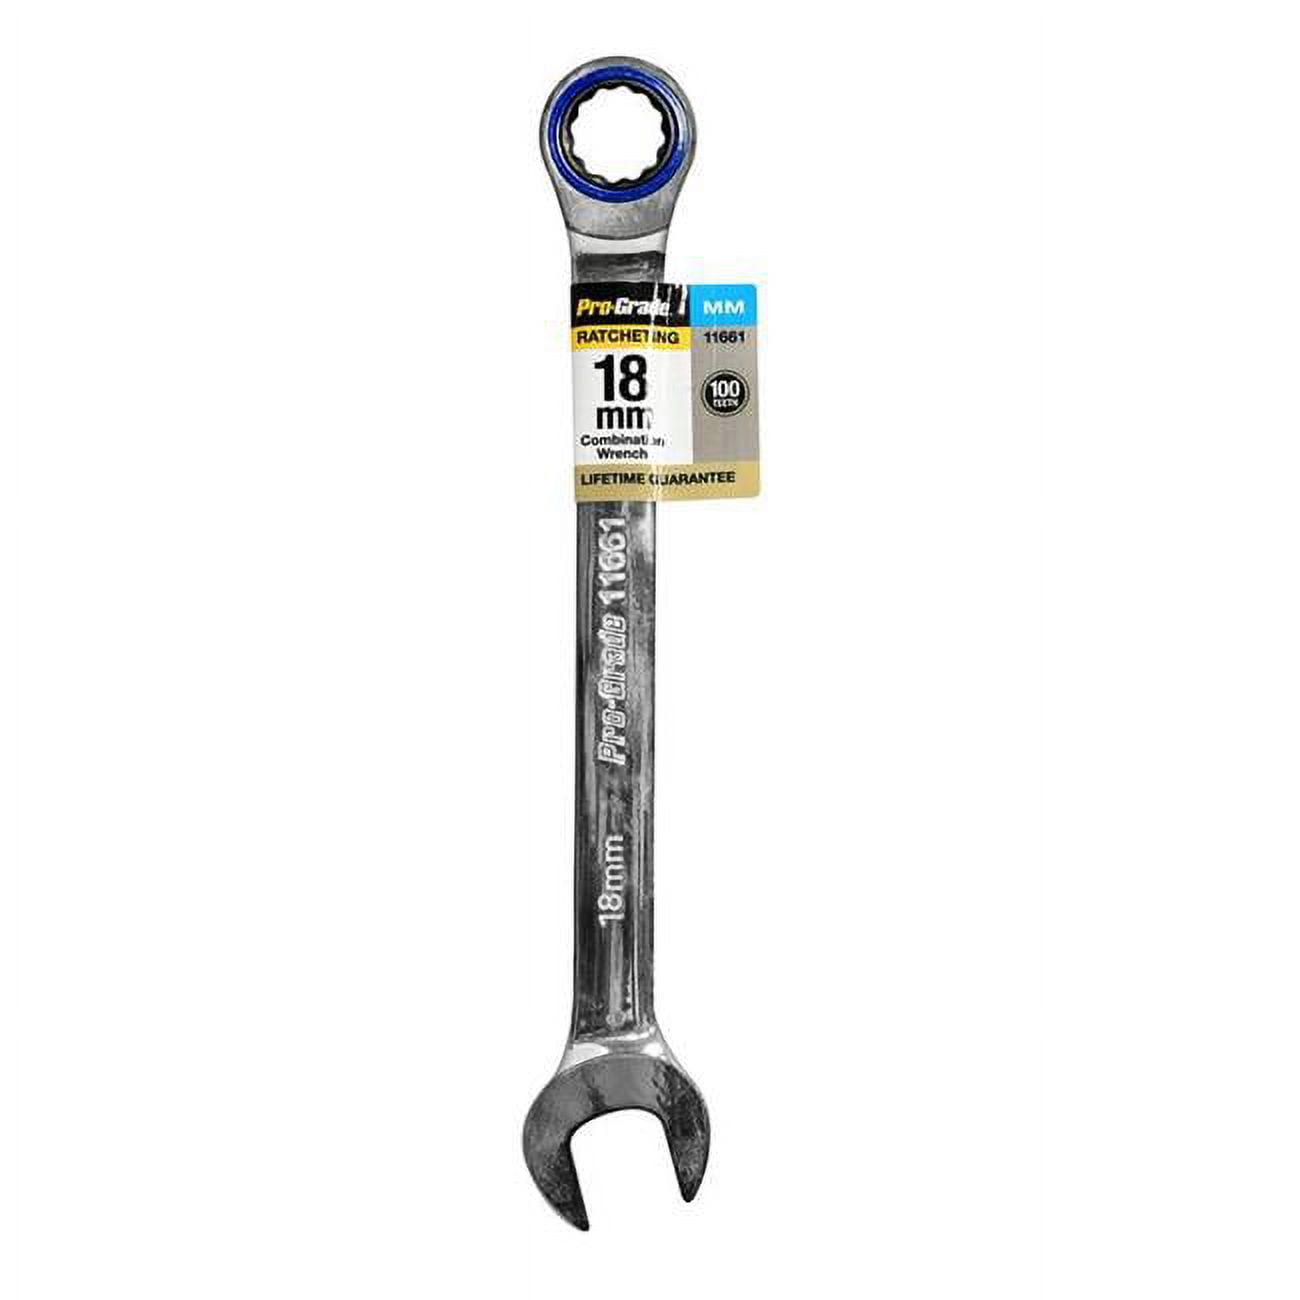 Picture of Pro-Grade 11661 18 mm Ratcheting Combo Wrench